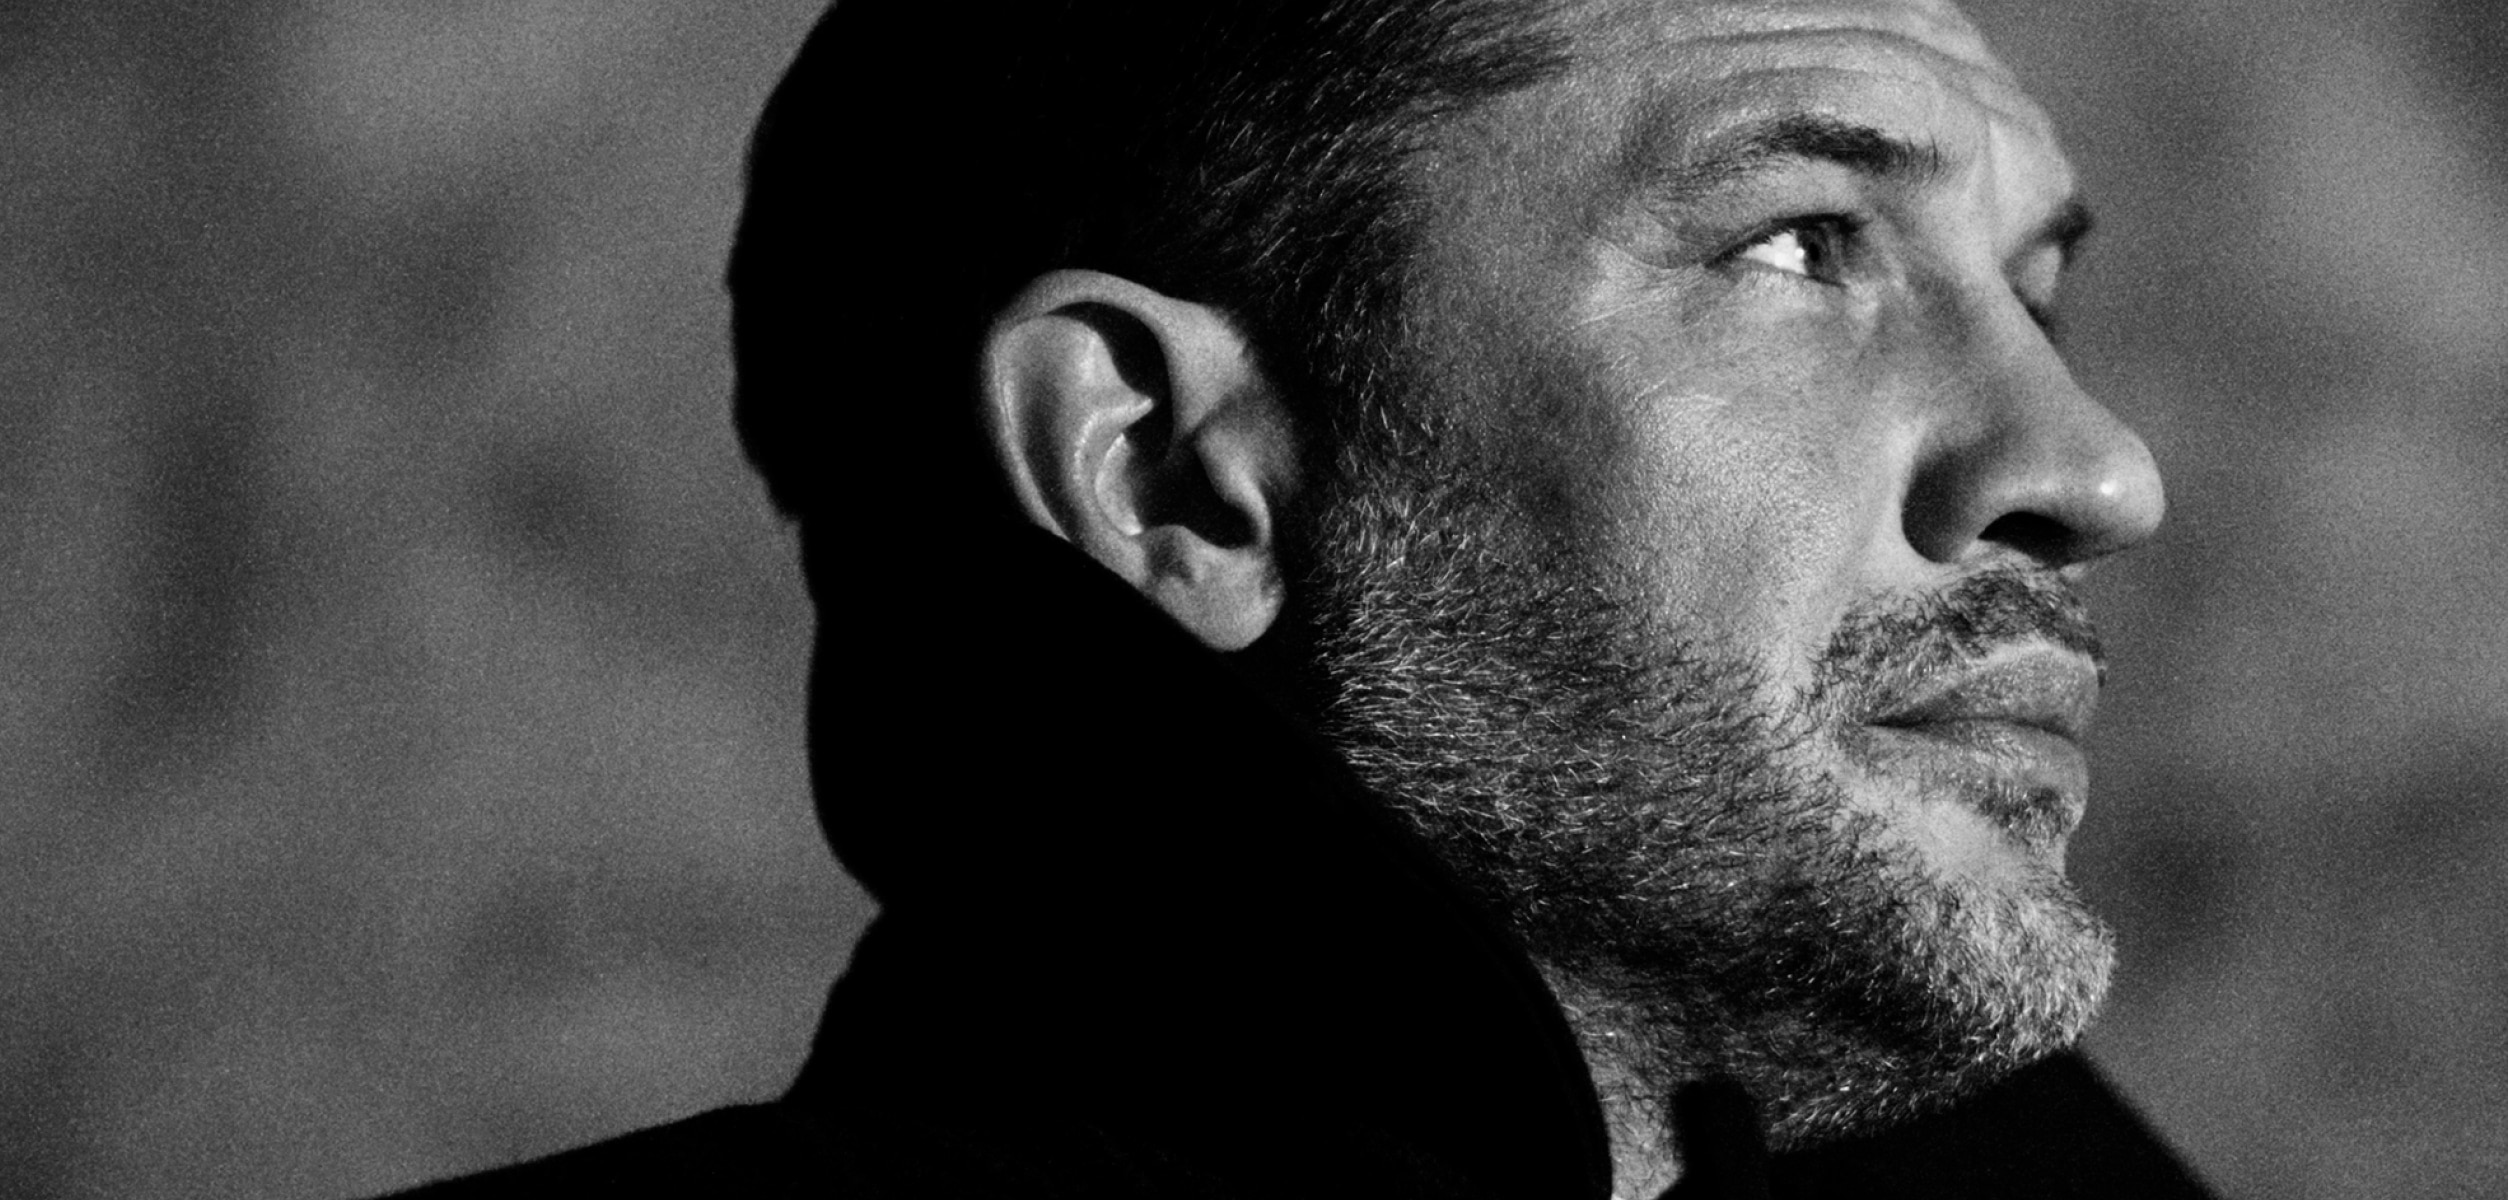 'A side portrait of Tom Hardy in black and white, gazing into the distance. He wears a formal coat, with an upturned collar.